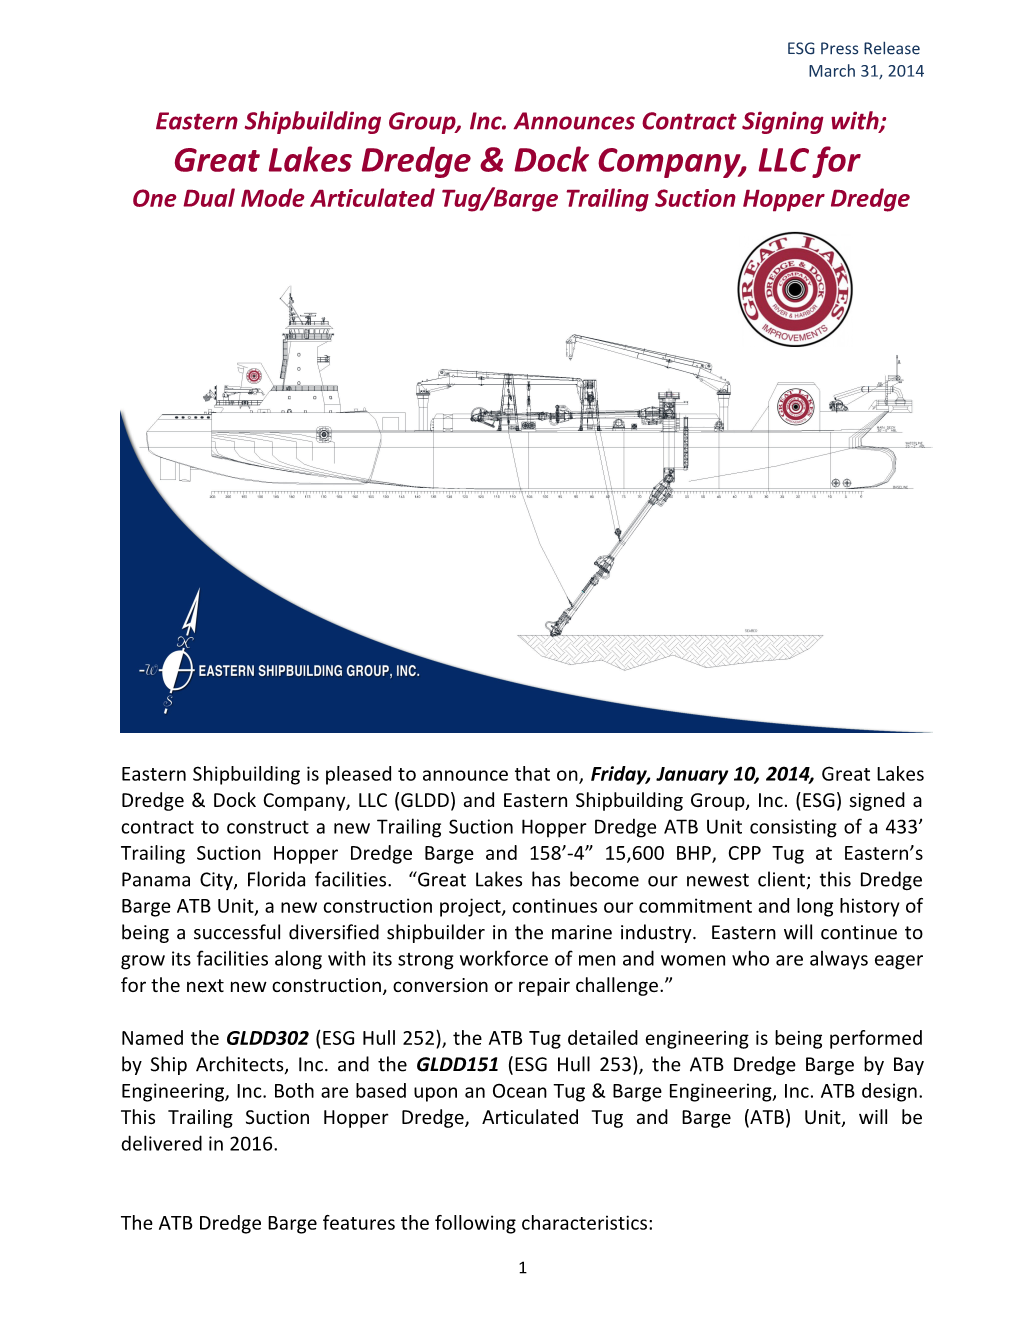 Eastern Shipbuilding Group, Inc. Announces Contract Signing With;